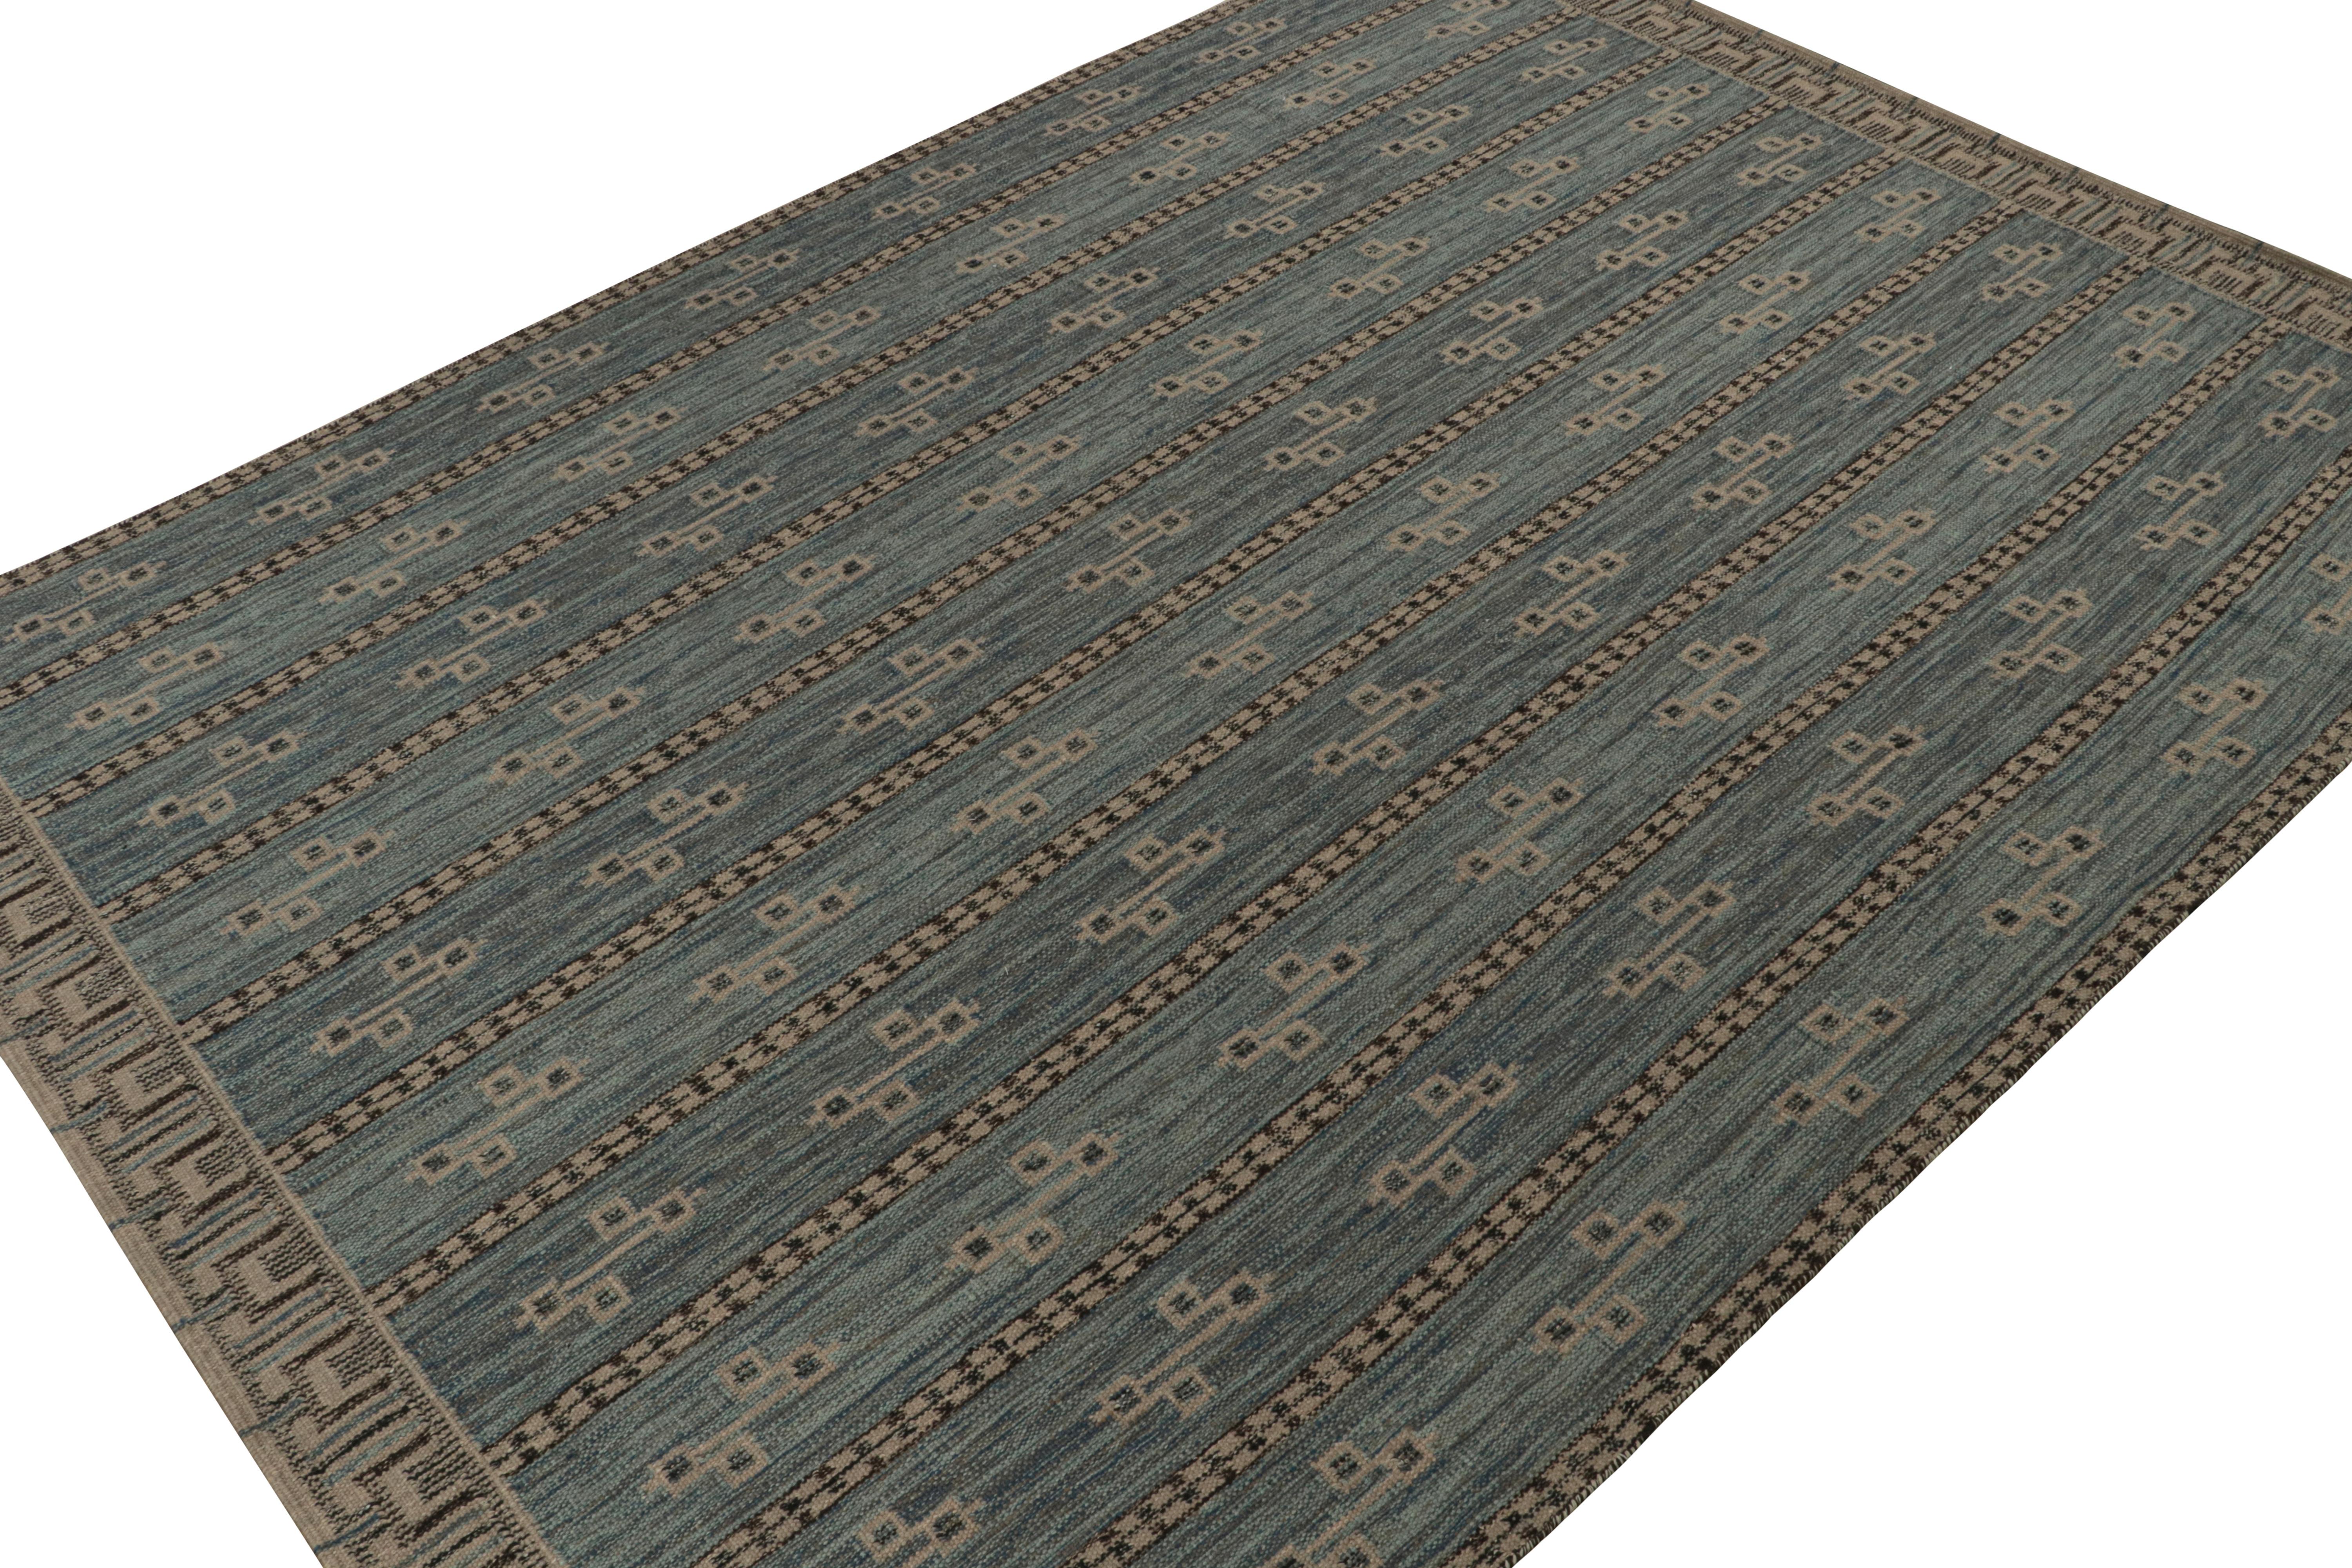 A smart 10x14 Swedish style kilim from our award-winning Scandinavian flat weave collection. Handwoven in wool, cotton & undyed natural yarns.

On the Design: 

This rug enjoys geometric patterns in blue, gray & black. Keen eyes will admire undyed,